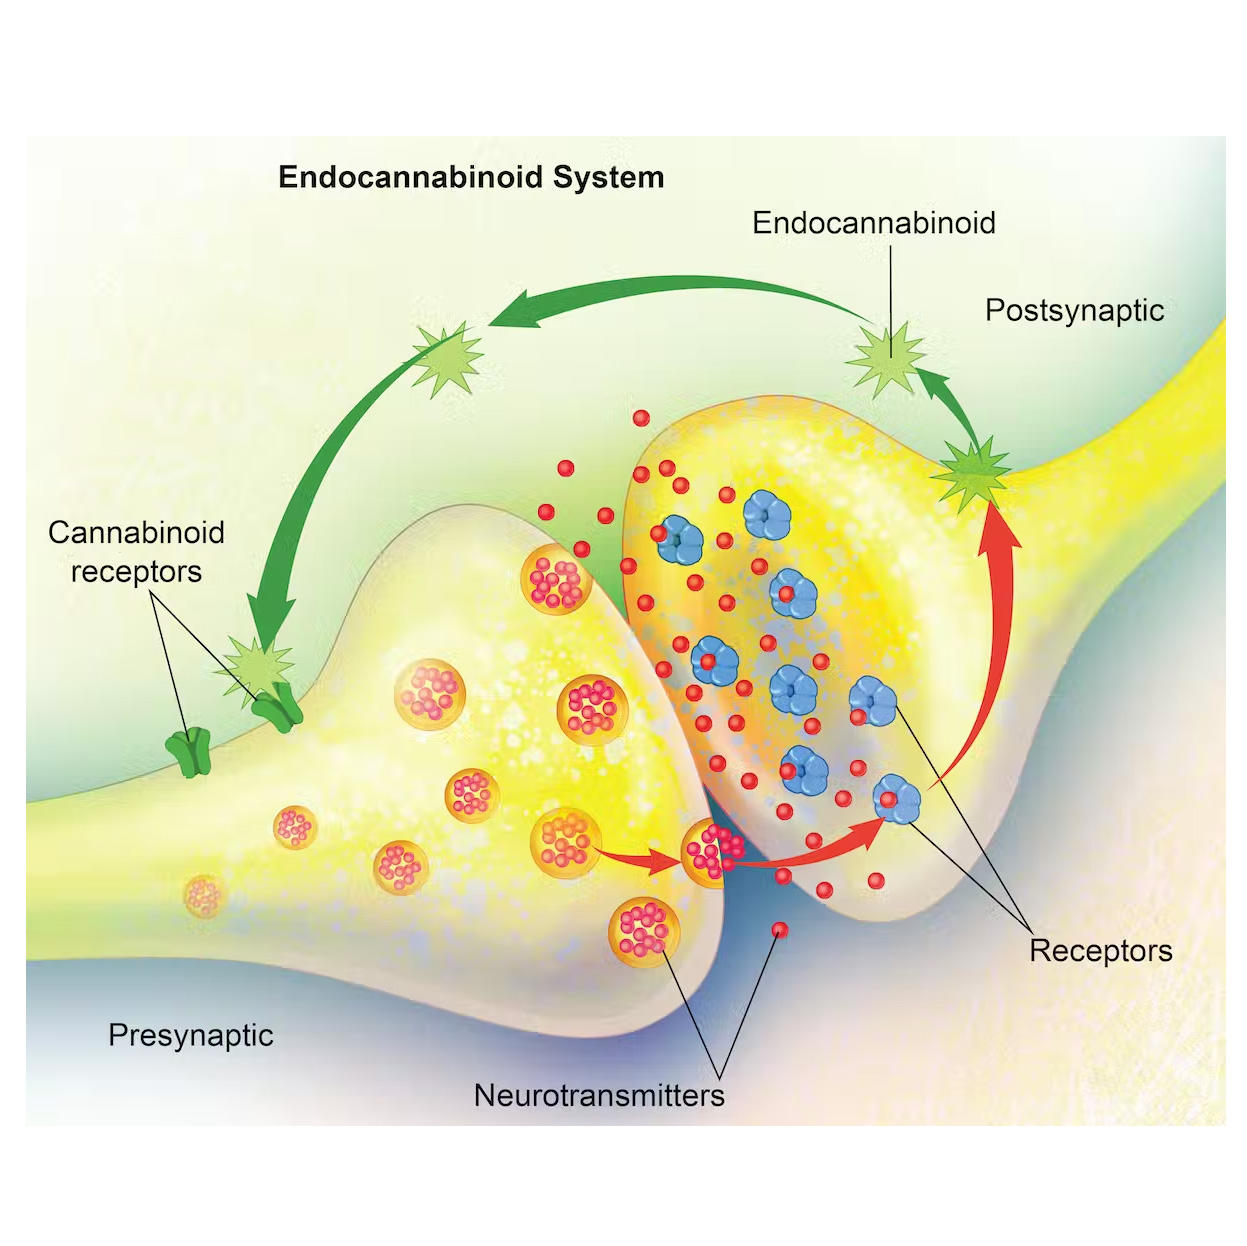 A diagram of the endocannabinoid system